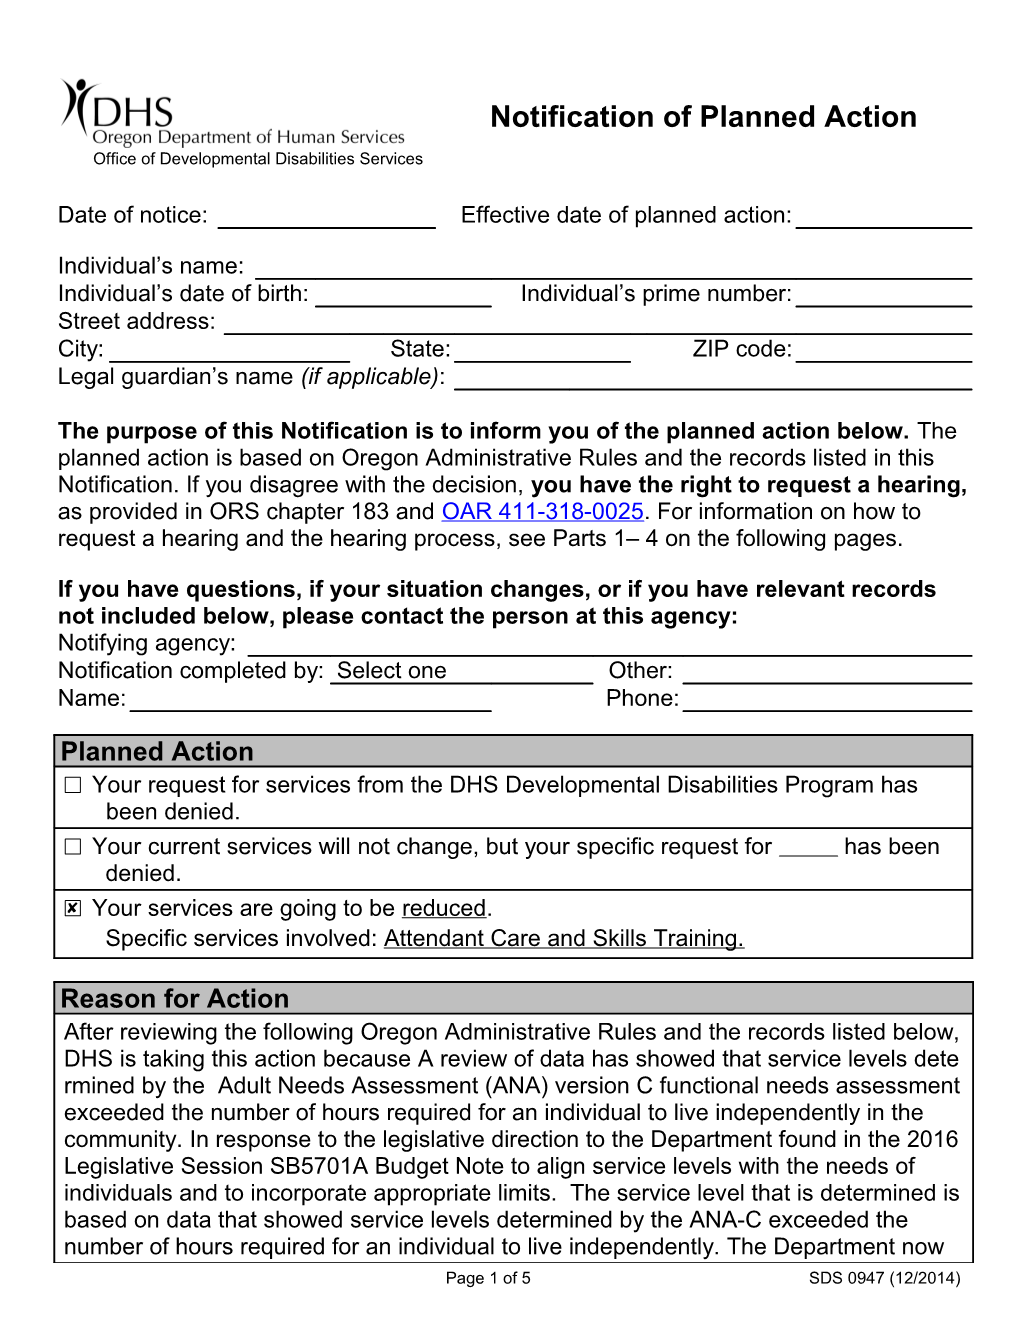 Reduction Notification of Planned Action Adult Template